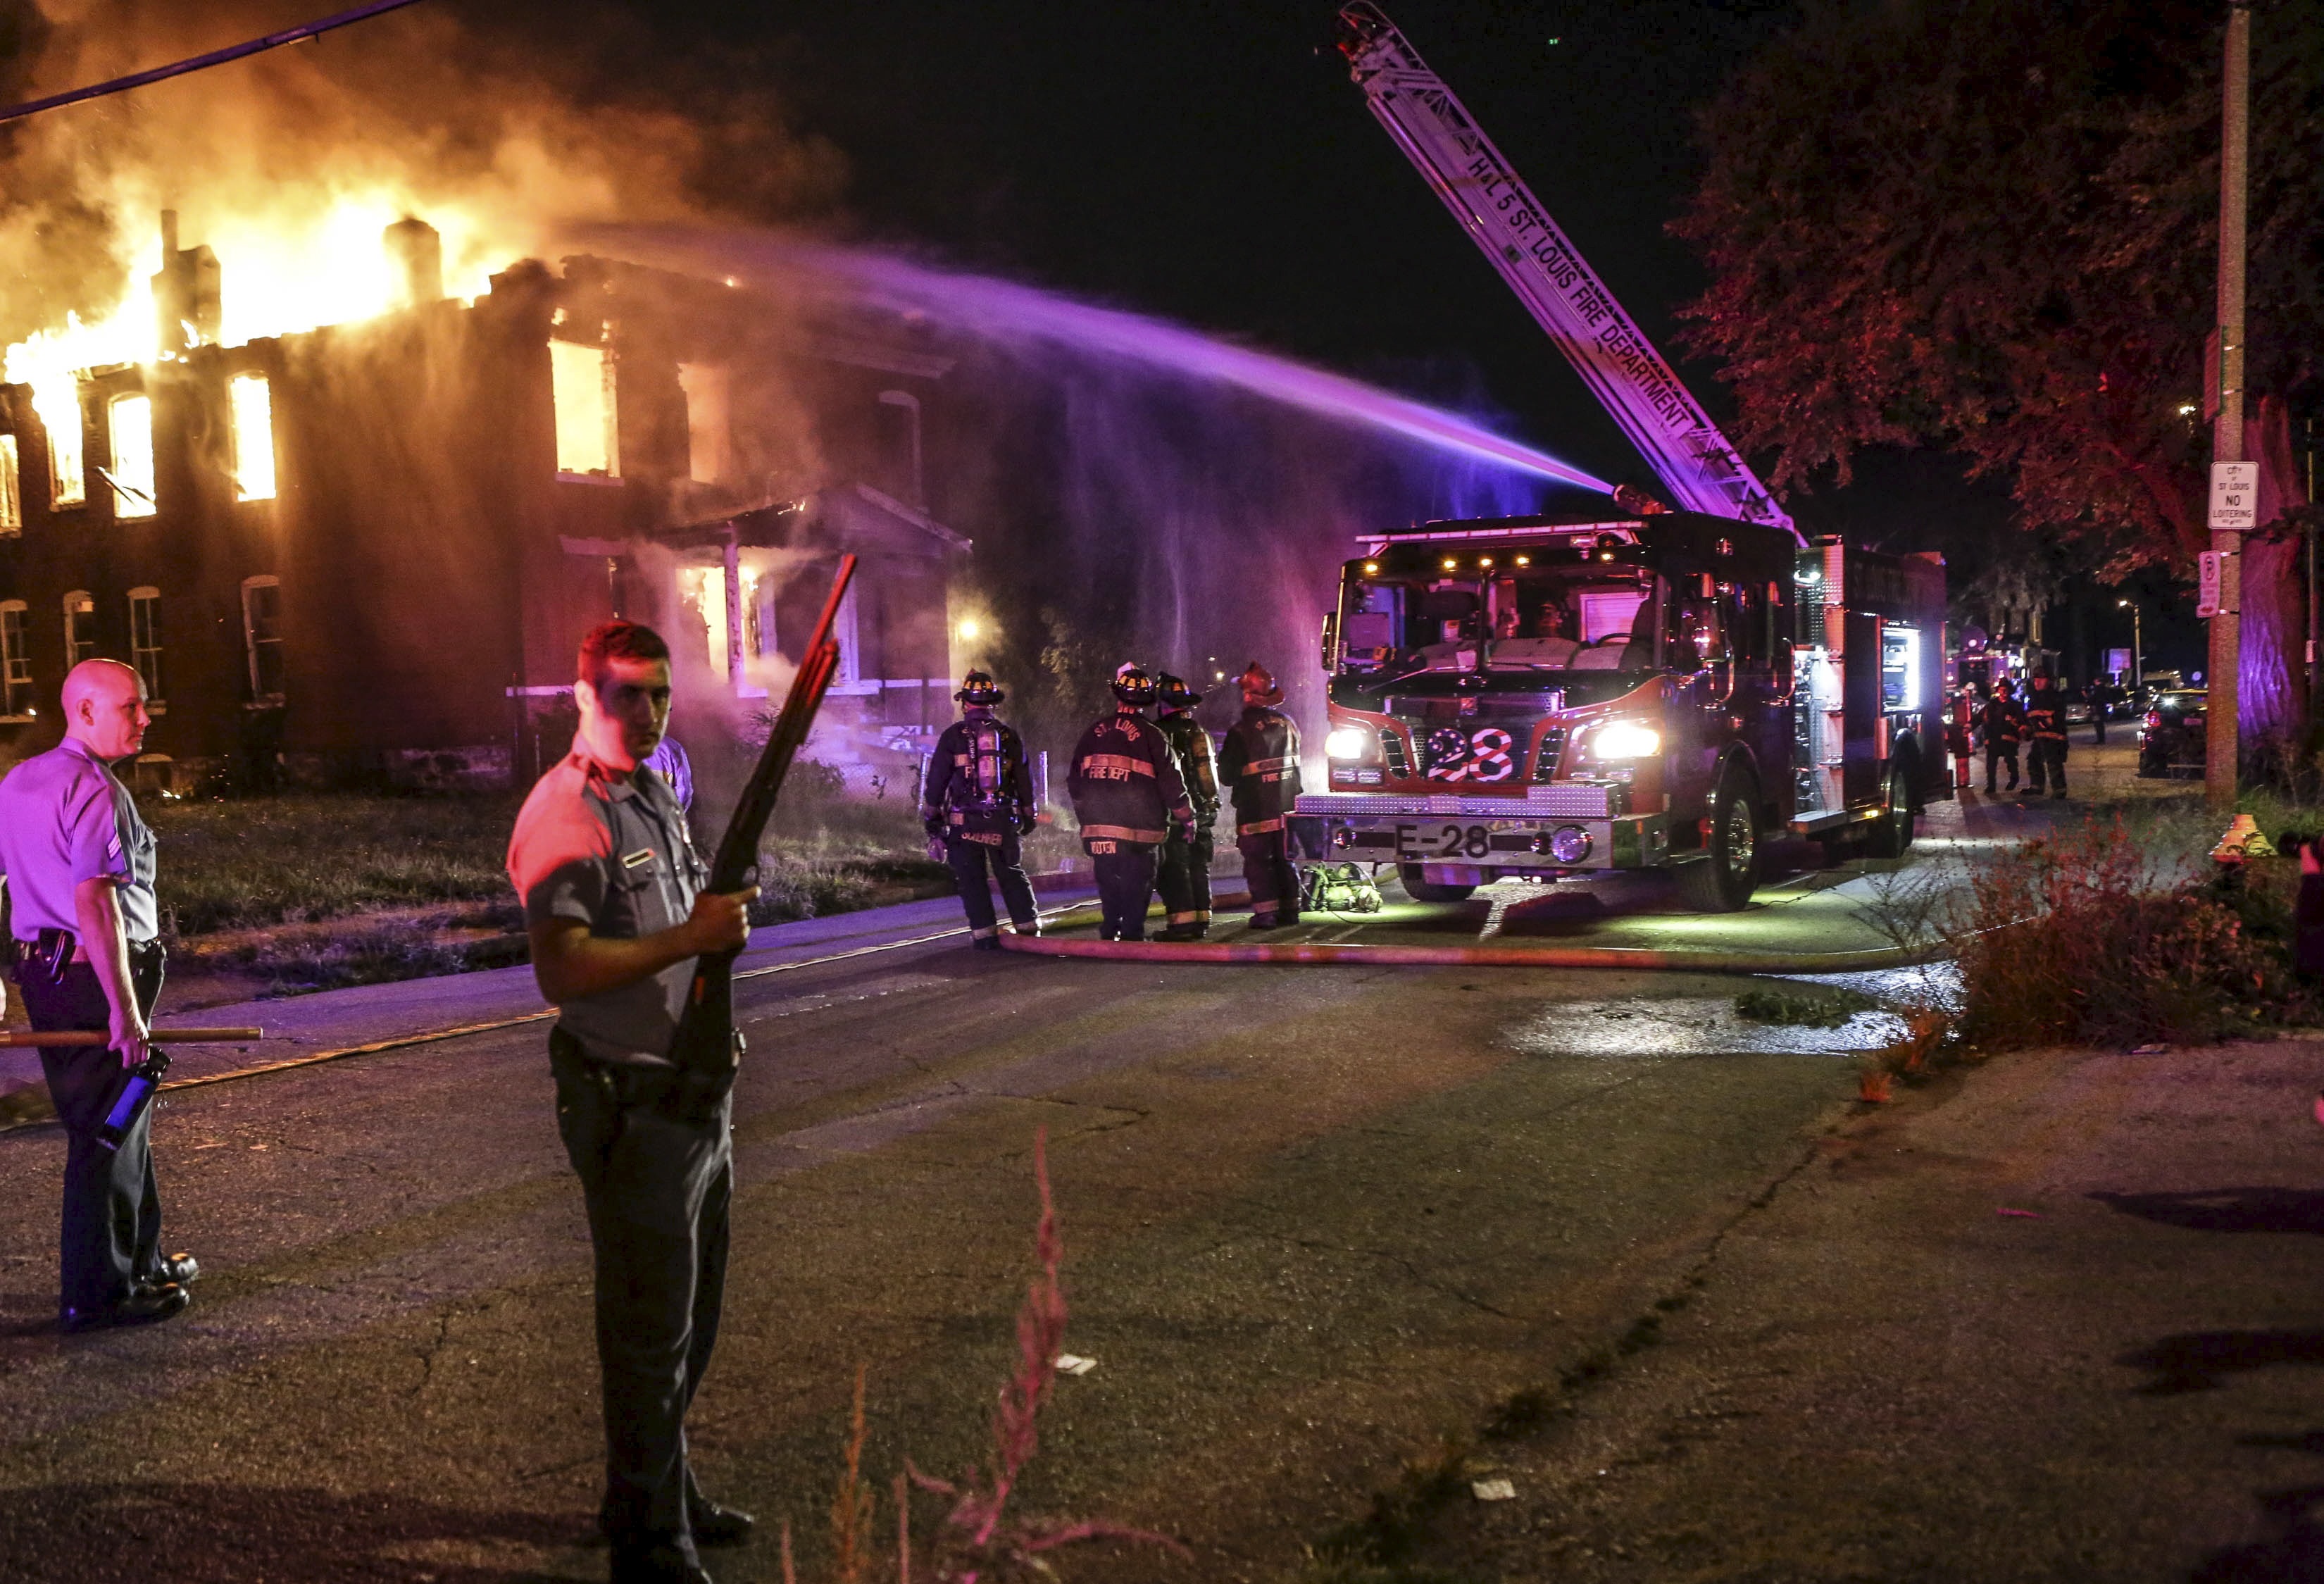 Firefighters attempt to put out a fire at an abandoned building with the protection of St. Louis City Police in St. Louis, Missouri August 19, 2015. According to eyewitness, protesters demonstrating against a police shooting earlier in the day in St. Louis set the building on fire. St. Louis police fatally shot a black teenager on Wednesday who they say pointed a gun at them, and later faced angry crowds, reigniting racial tensions first sparked by the killing of an unarmed black teen in another Missouri town a year ago. REUTERS/Lawrence Bryant TPX IMAGES OF THE DAY - RTX1OVQE